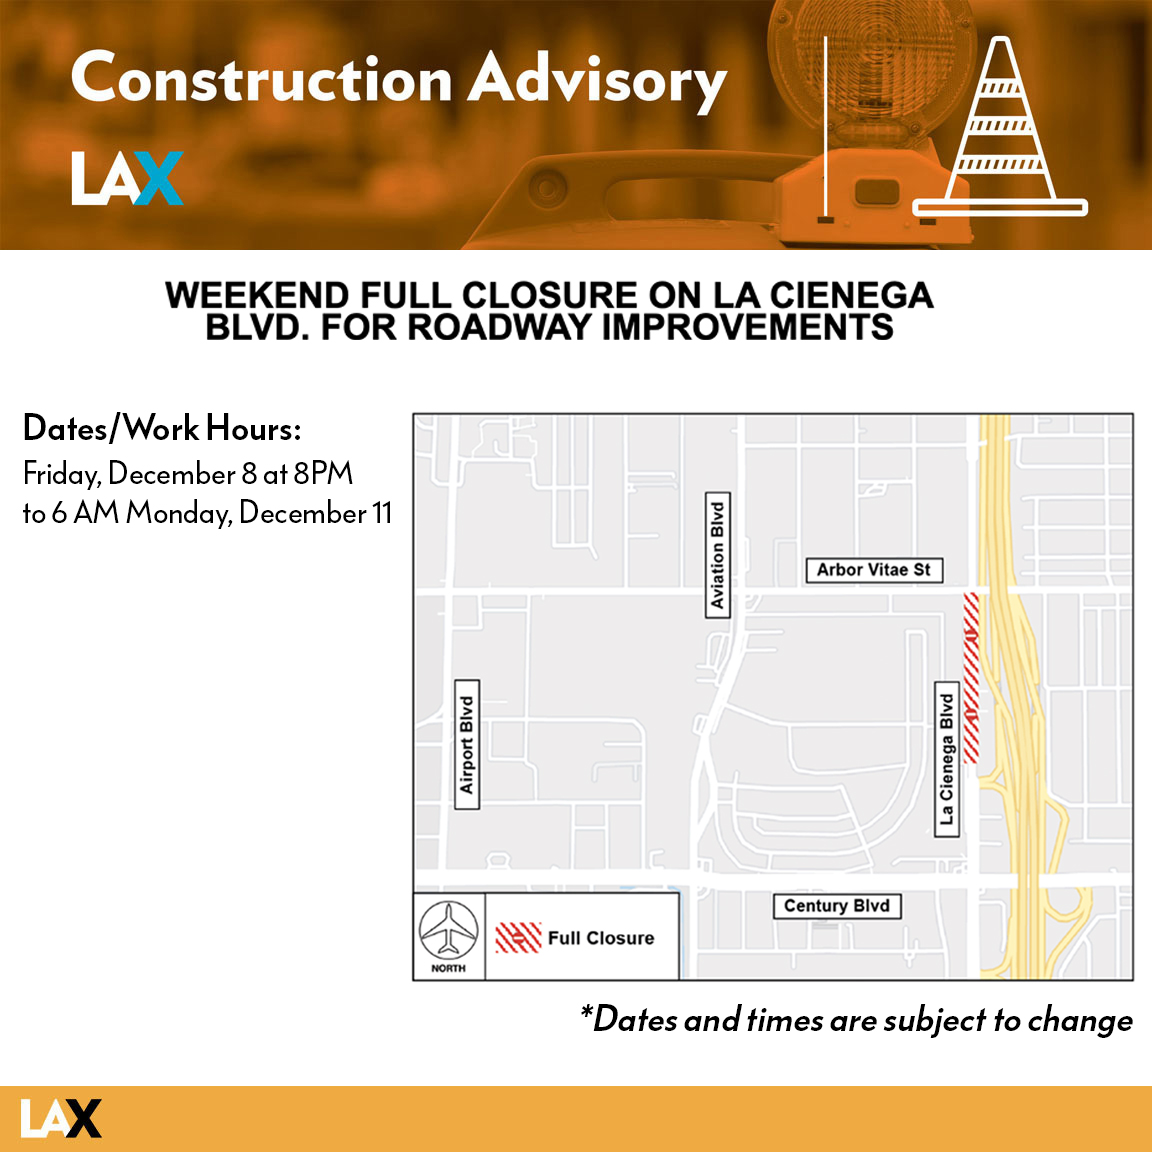 To facilitate repaving & restriping for La Cienega Blvd.'s road widening project, a full closure will be in effect on La Cienega Blvd. from Arbor Vitae St. to just north of the 405 freeway off-ramp from 8PM on Friday, December 8 through 6AM on Monday, December 11.